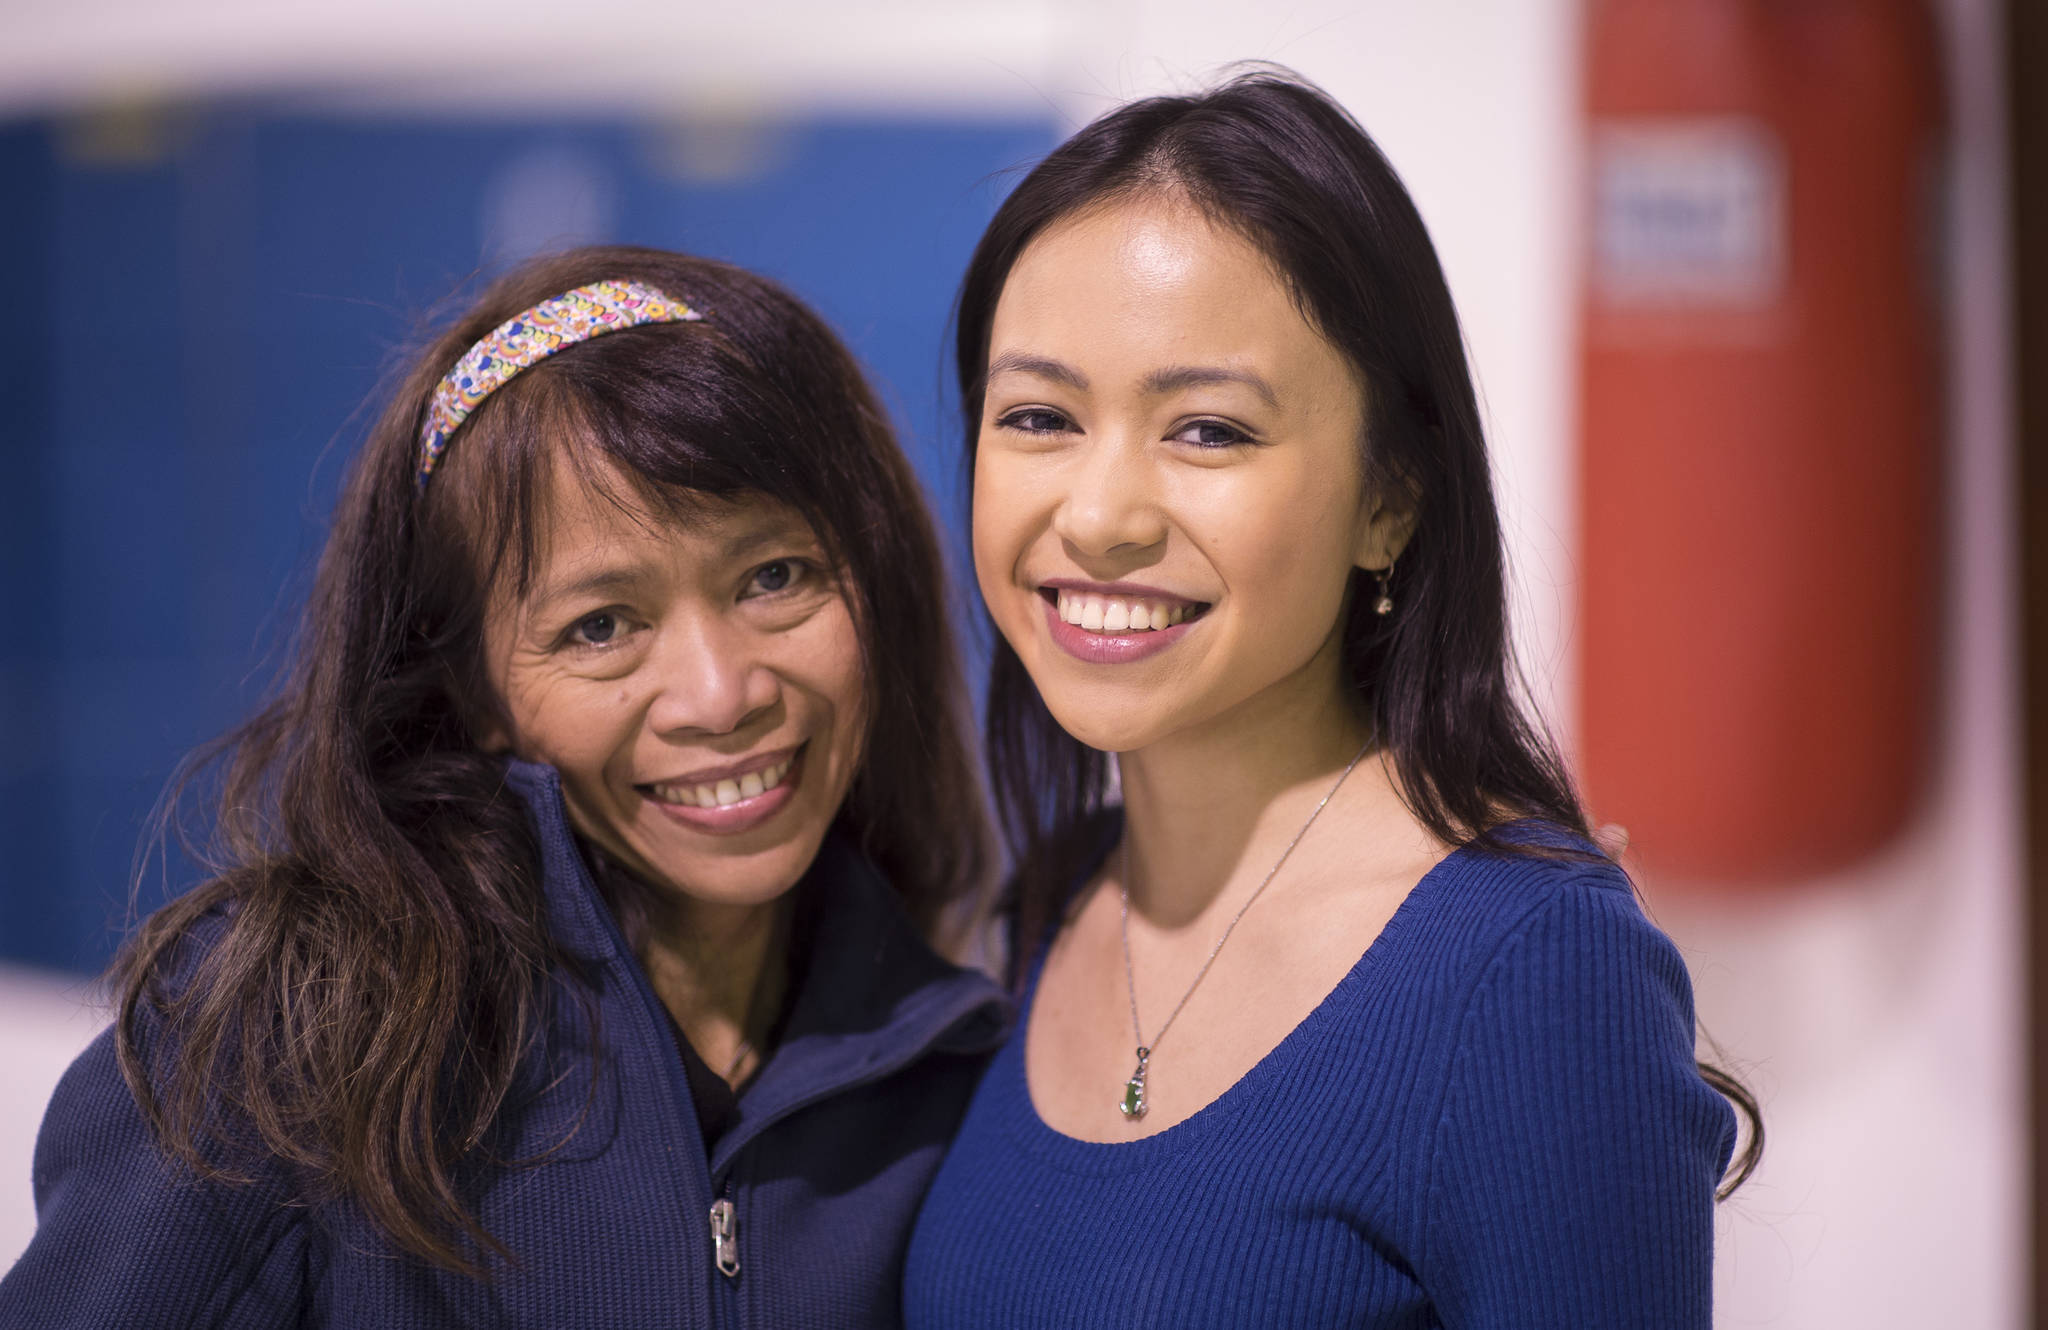 Marella Gungob, right, poses with her mother, Miriam Wagoner, during an interview at the Juneau Shotokan dojo on Thursday, Jan. 11, 2018. Gungob will participate in Kakehashi Project under the sponsorships of the Consulate of Japan in Anchorage. This Project is to foster a greater understanding of Japanese politics, society, history and foreign policy via personal exchange by inviting promising future leaders from North America to Japan. (Michael Penn | Juneau Empire)